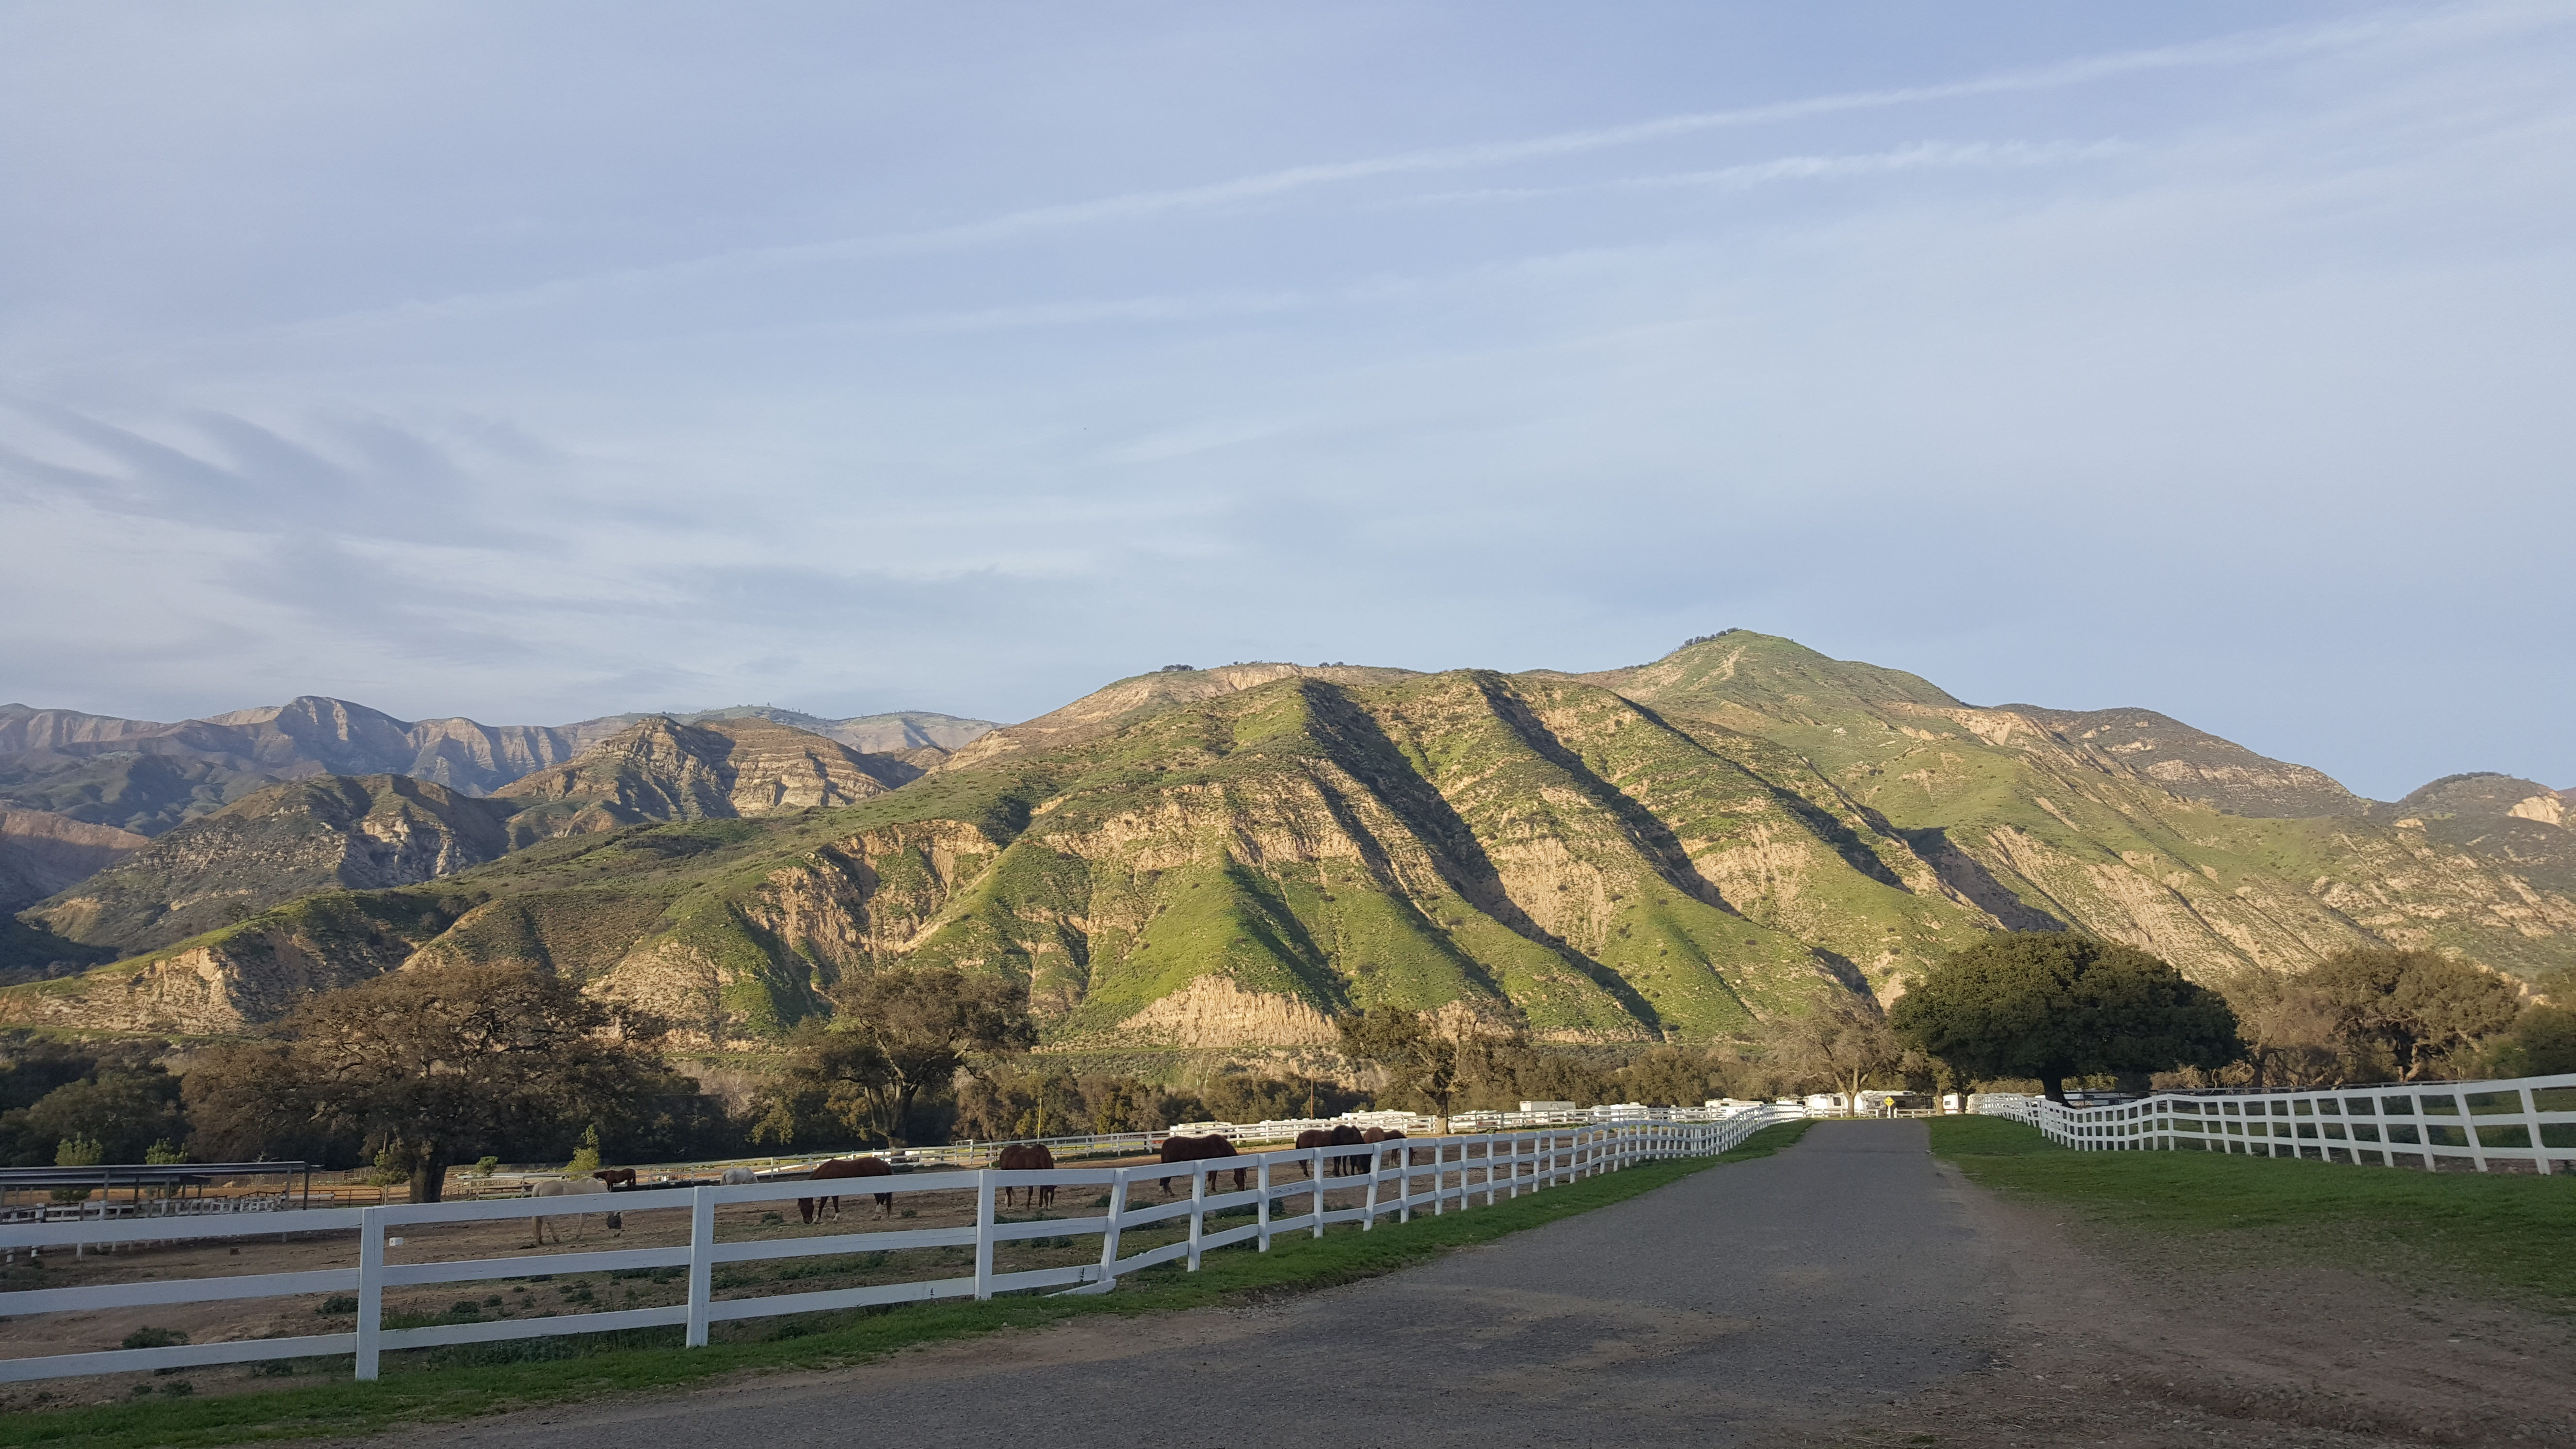 A ranch in Santa Barbara similar to the family one Bridget Fonda owns | Source: Getty Images